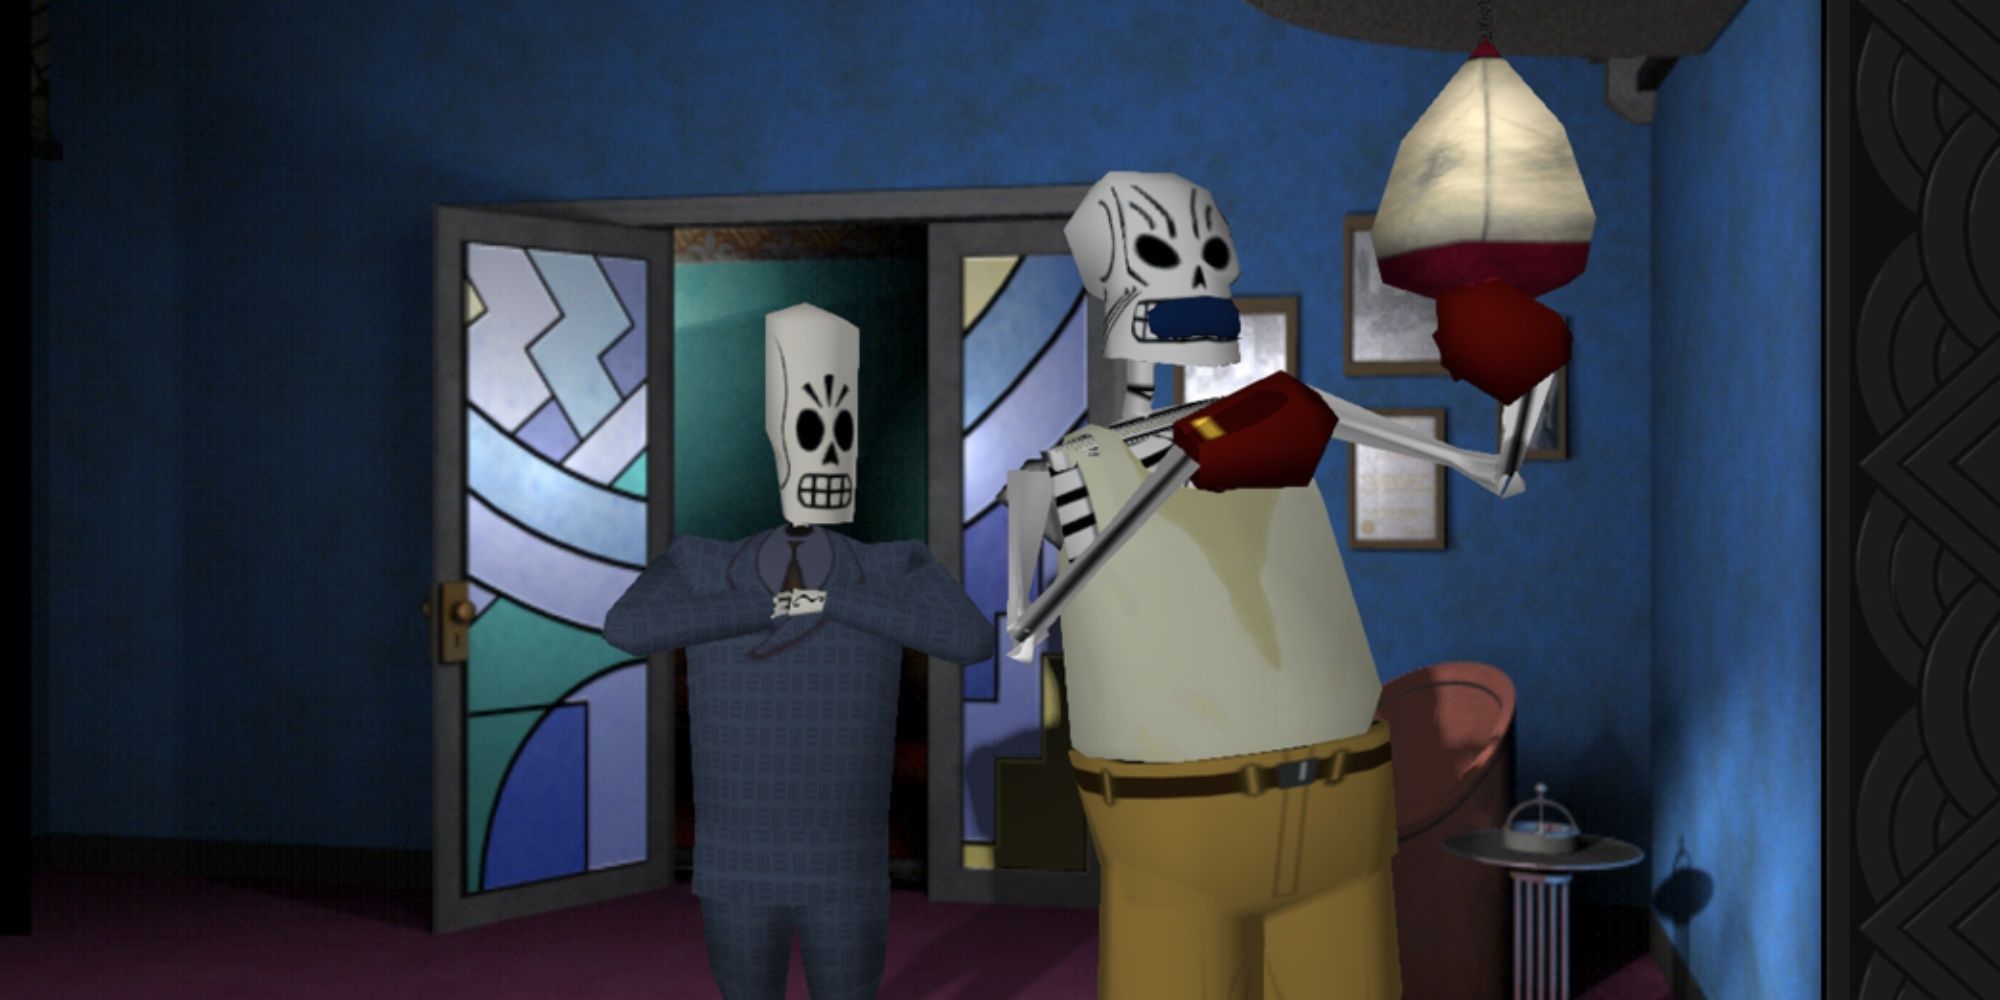 Grim Fandango's protagonists inspecting an object in a blue-painted room.